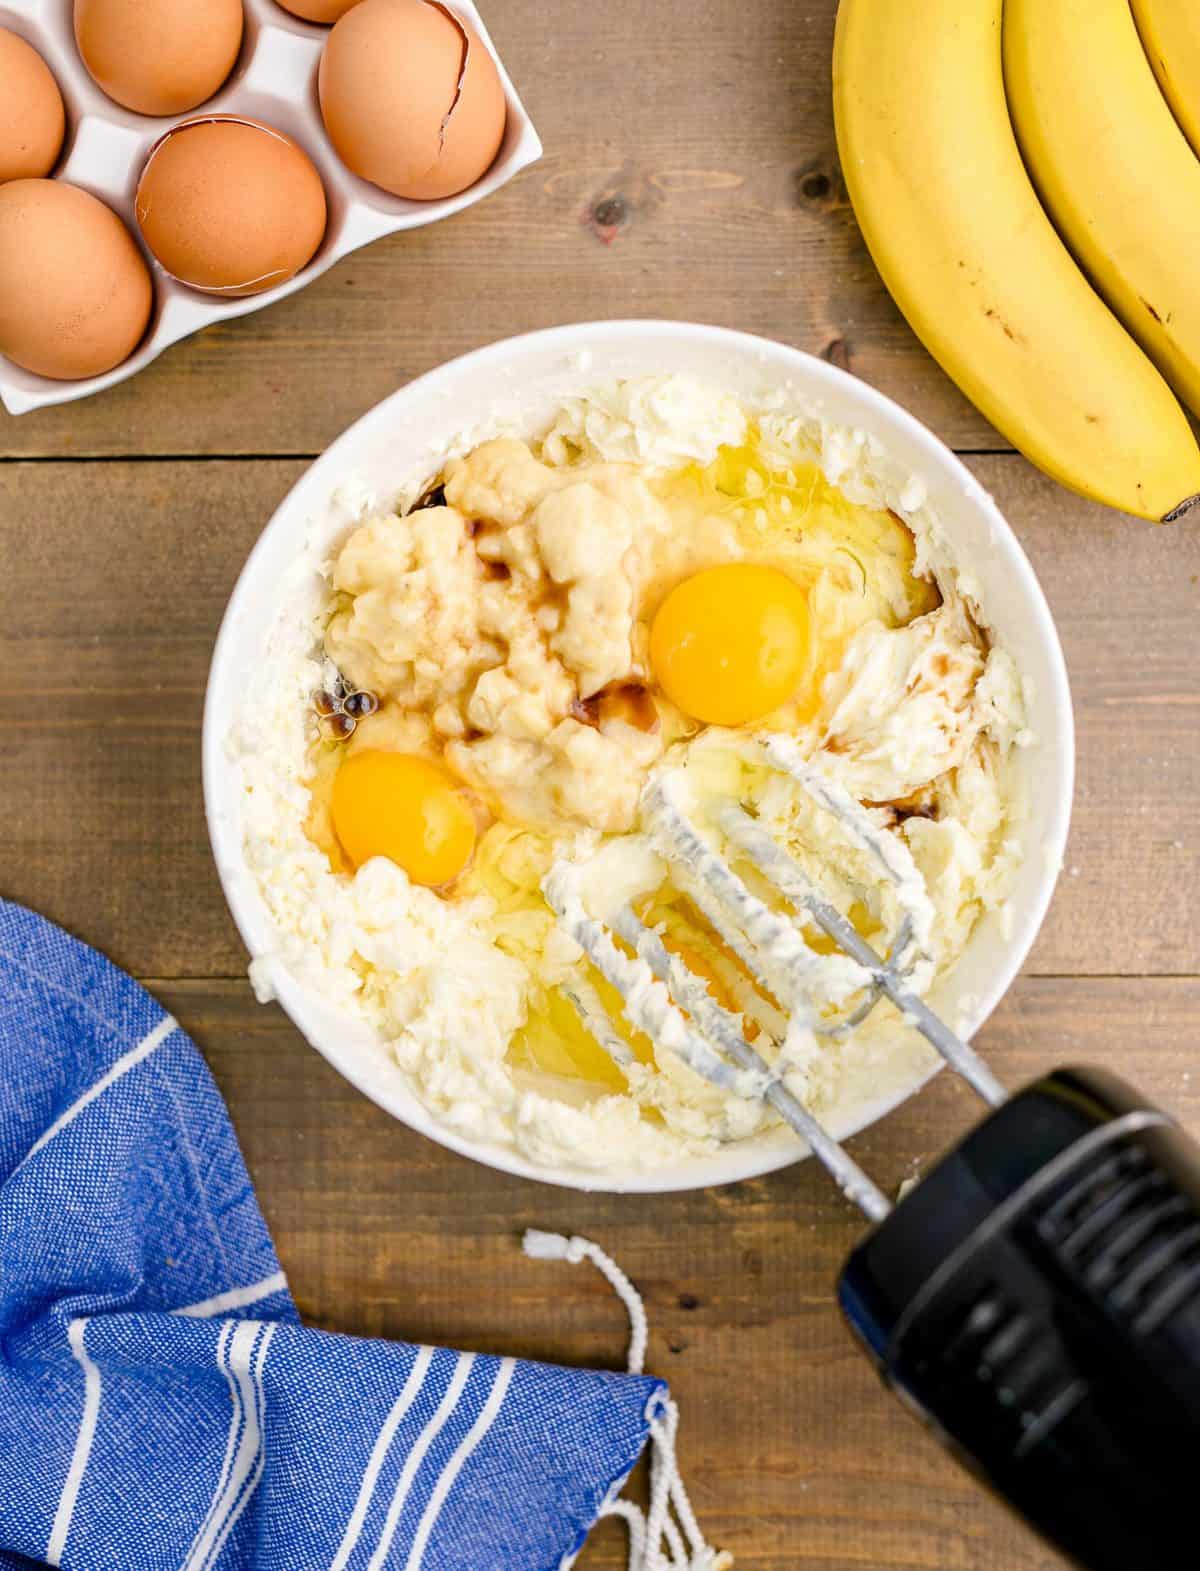 Eggs, vanilla and banana added to cream cheese mixture in a white bowl.